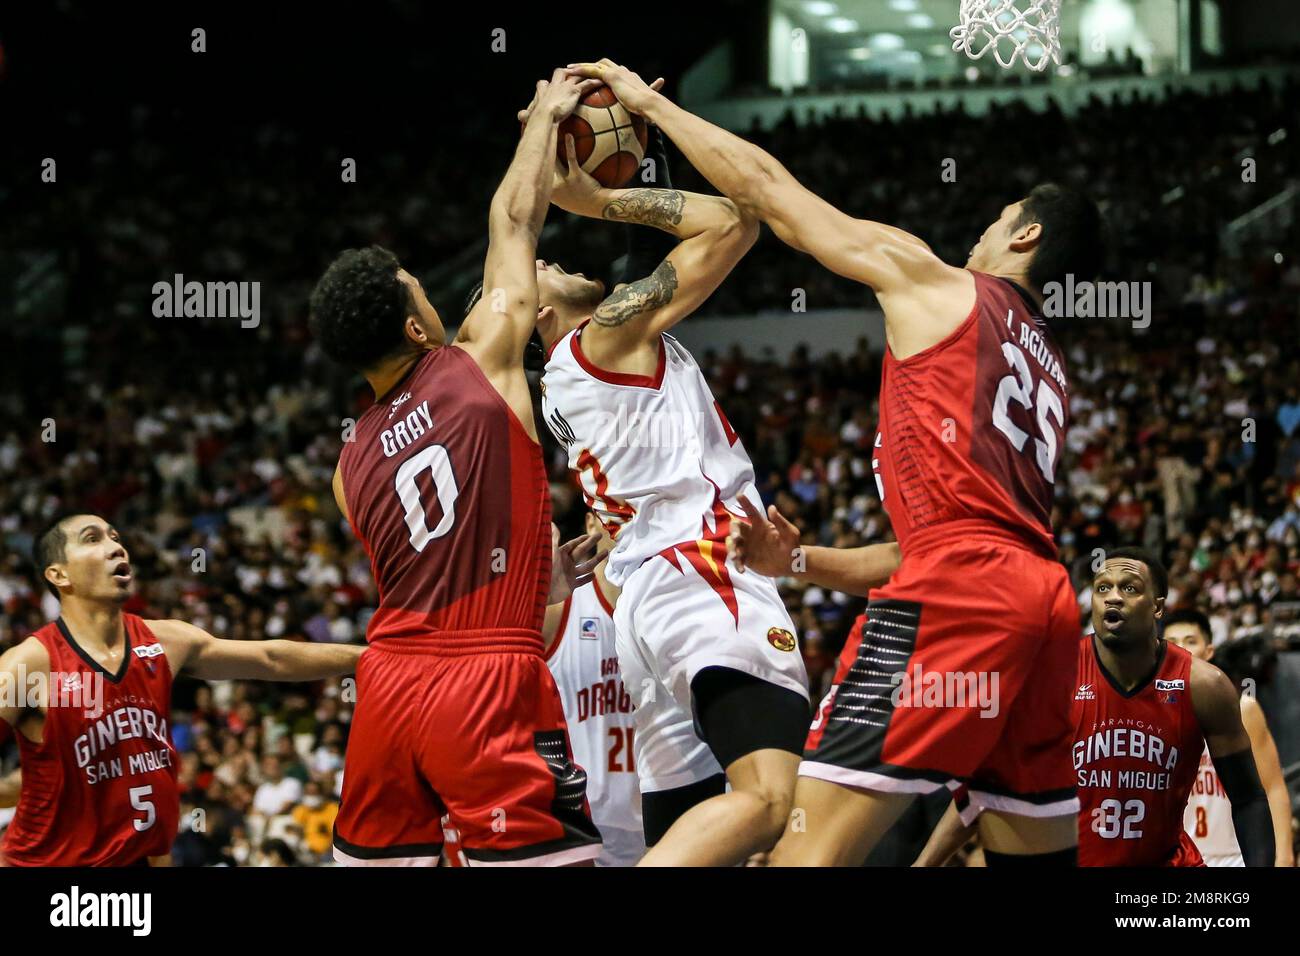 Bulacan Province. 15th Jan, 2023. Players from Barangay Ginebra San Miguel  celebrate winning champion against Bay Area Dragons at the Commissioner's  Cup Finals of the Philippine Basketball Association (PBA) in Bulacan  Province